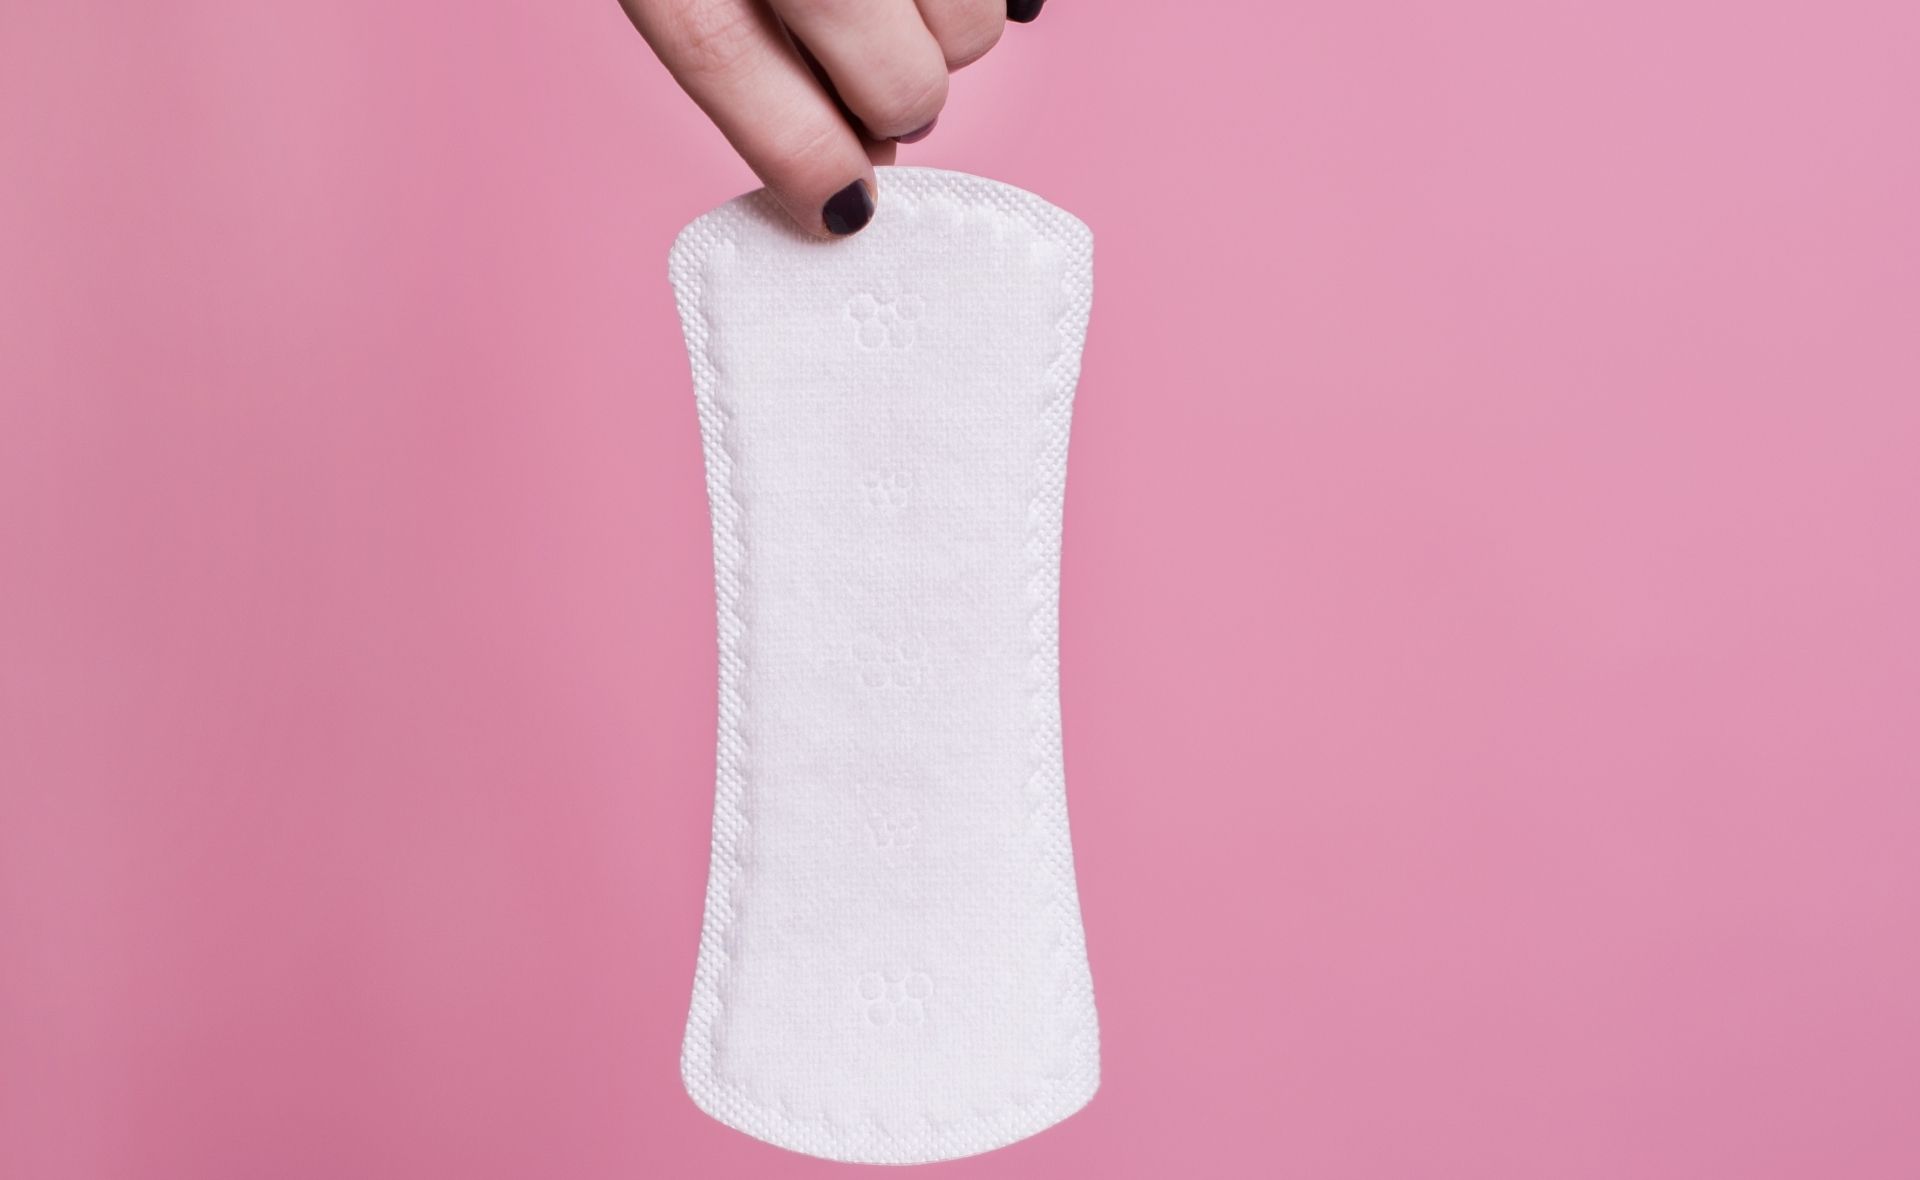 If you’re not sold on period underwear but want to reduce your menstrual waste, these biodegradable pads are for you